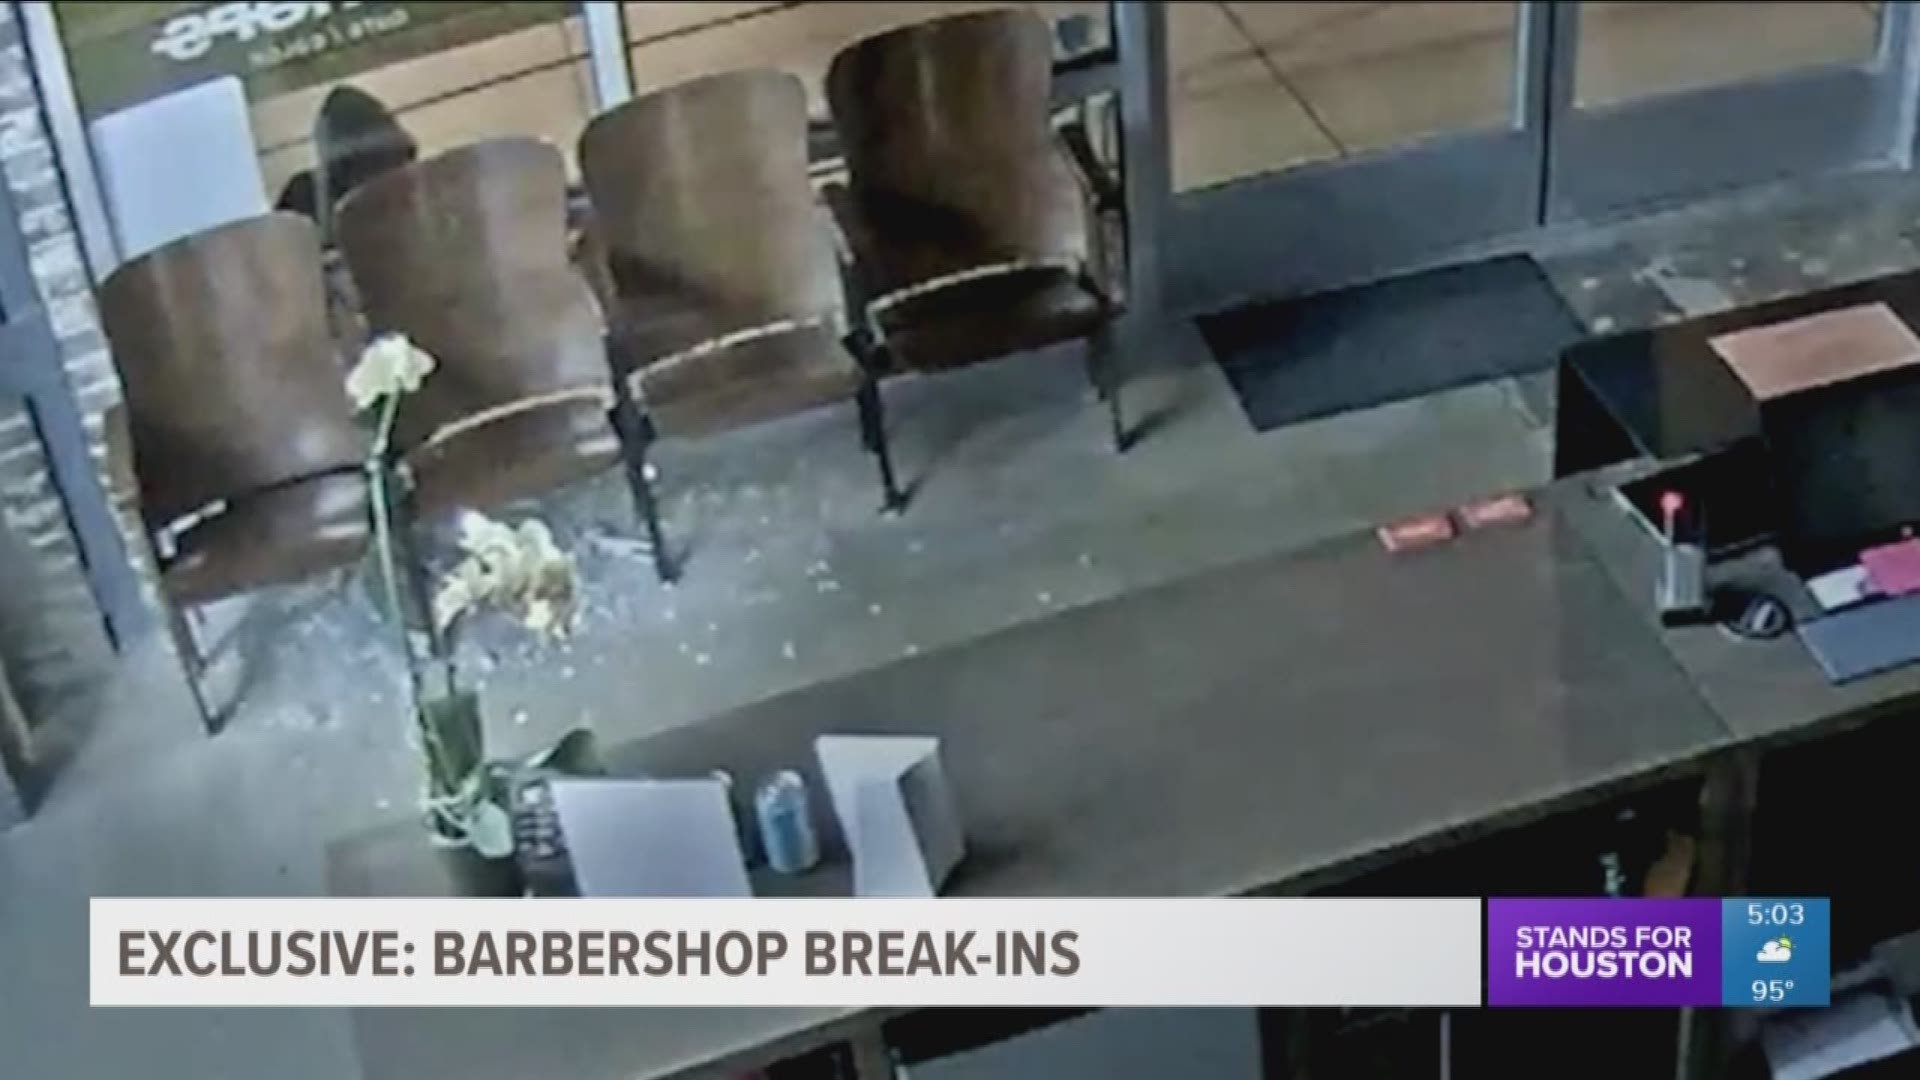 Three suspects broke into a barbershop three different times in one night.